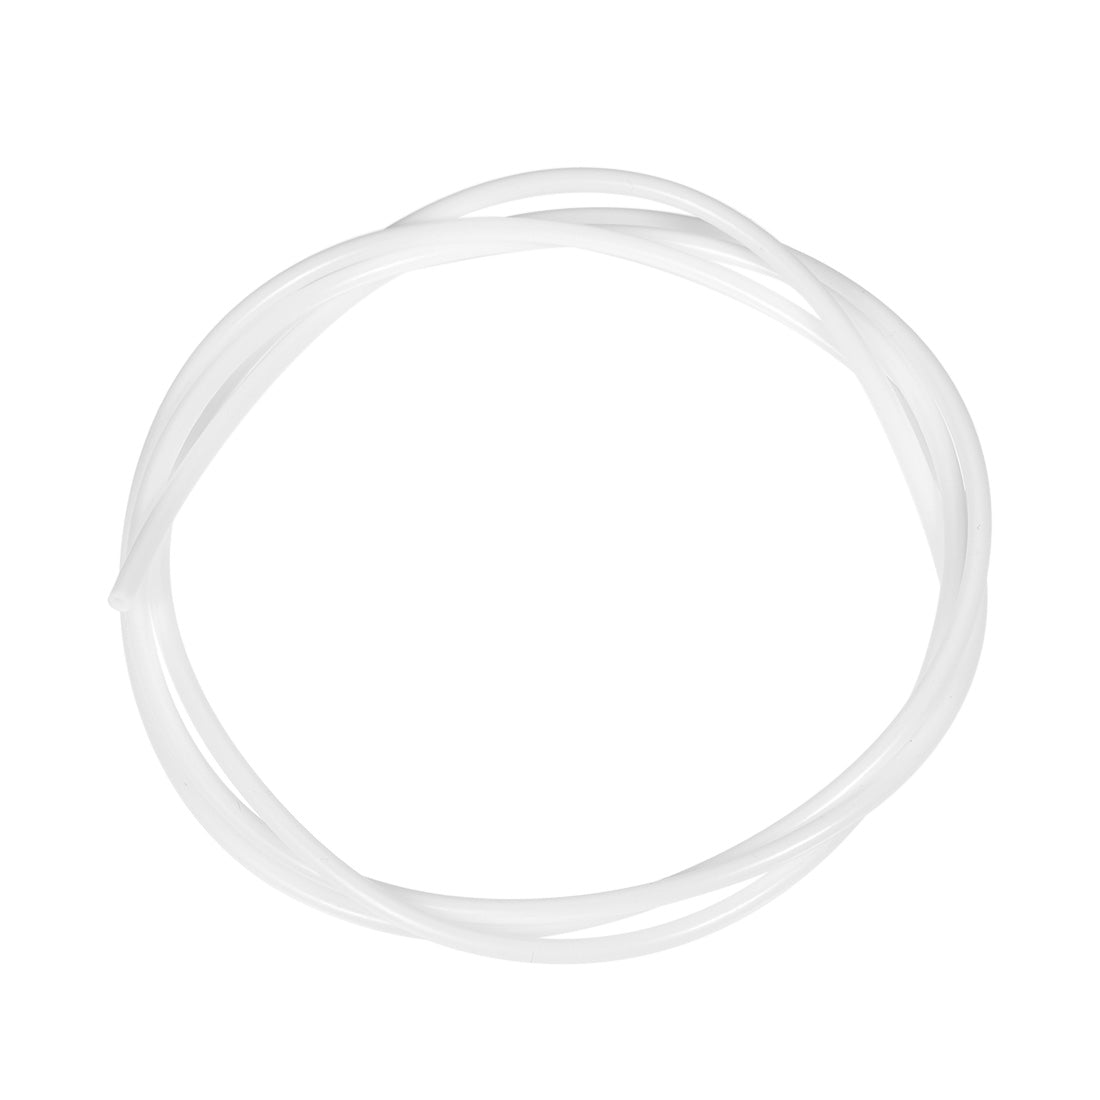 Uxcell Uxcell PTFE Tube 4.9Ft - ID 2mm x OD 4mm Fit 1.75 Filament for 3D Printer White